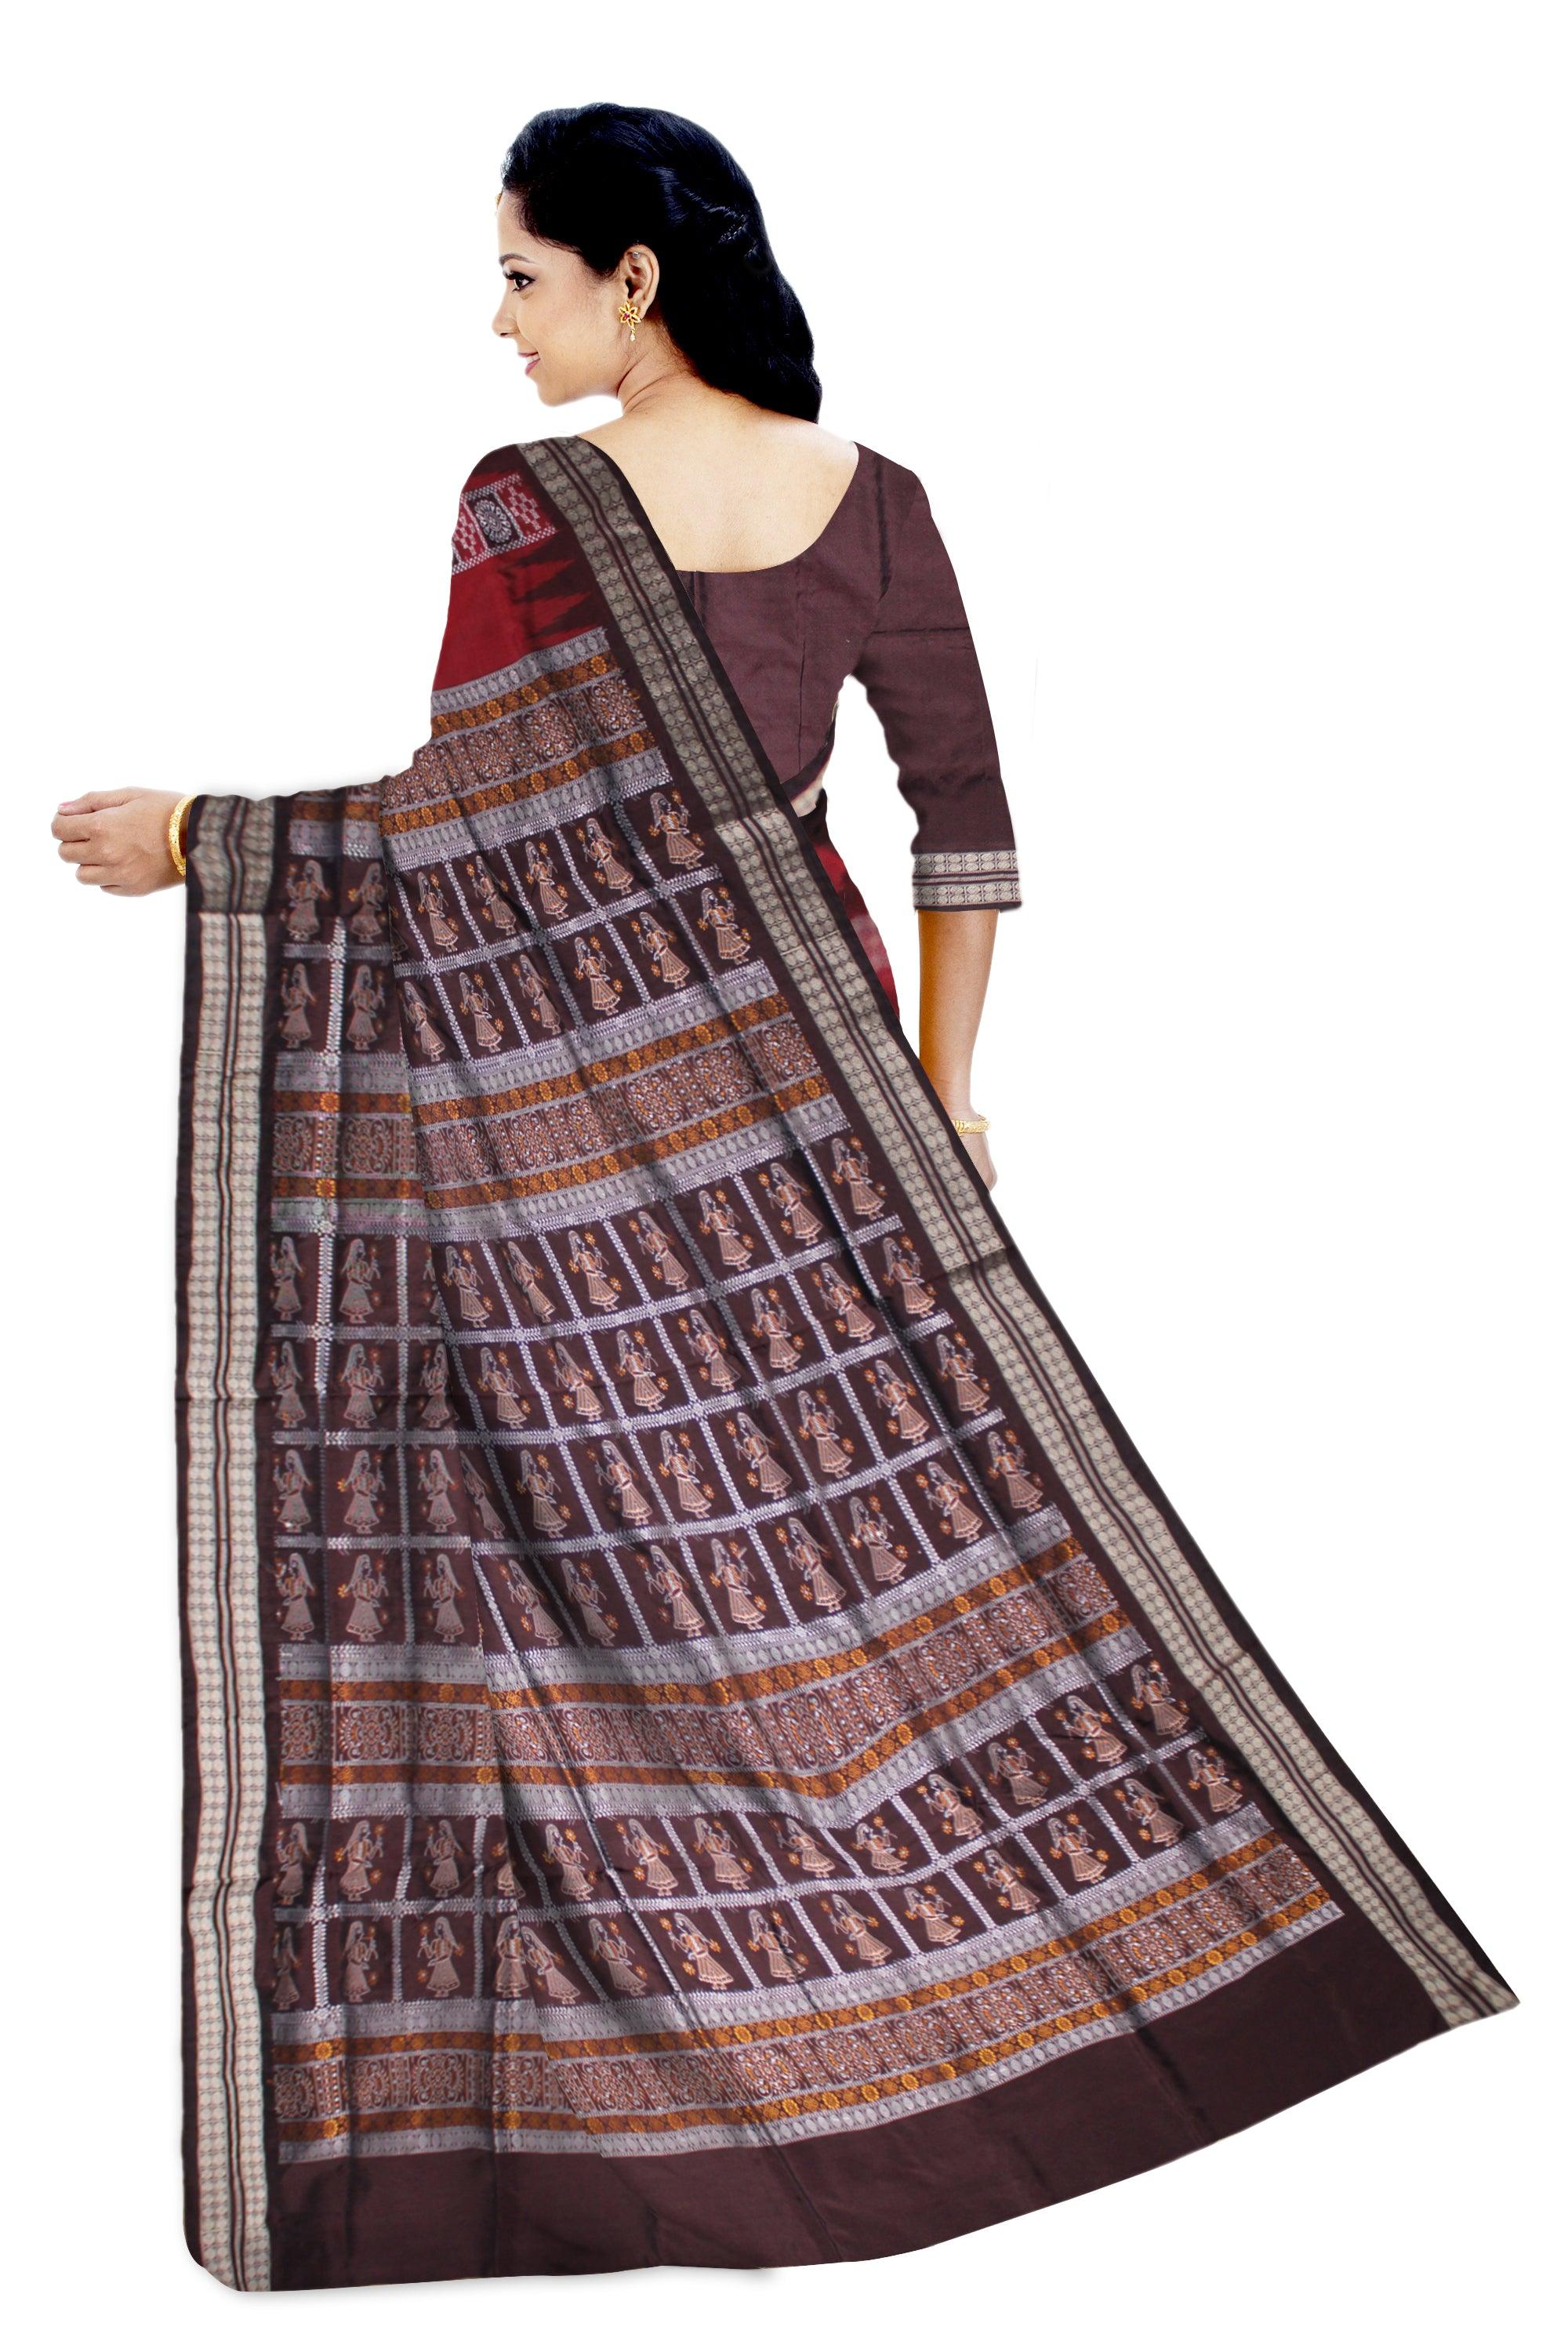 NEW DESIGN PALLU DOLL PRINT CHANDUA PASAPALI SAREE IN MAROON AND COFFEE COLOR ,  ATTACHED WITH BLOUSE PIECE. - Koshali Arts & Crafts Enterprise